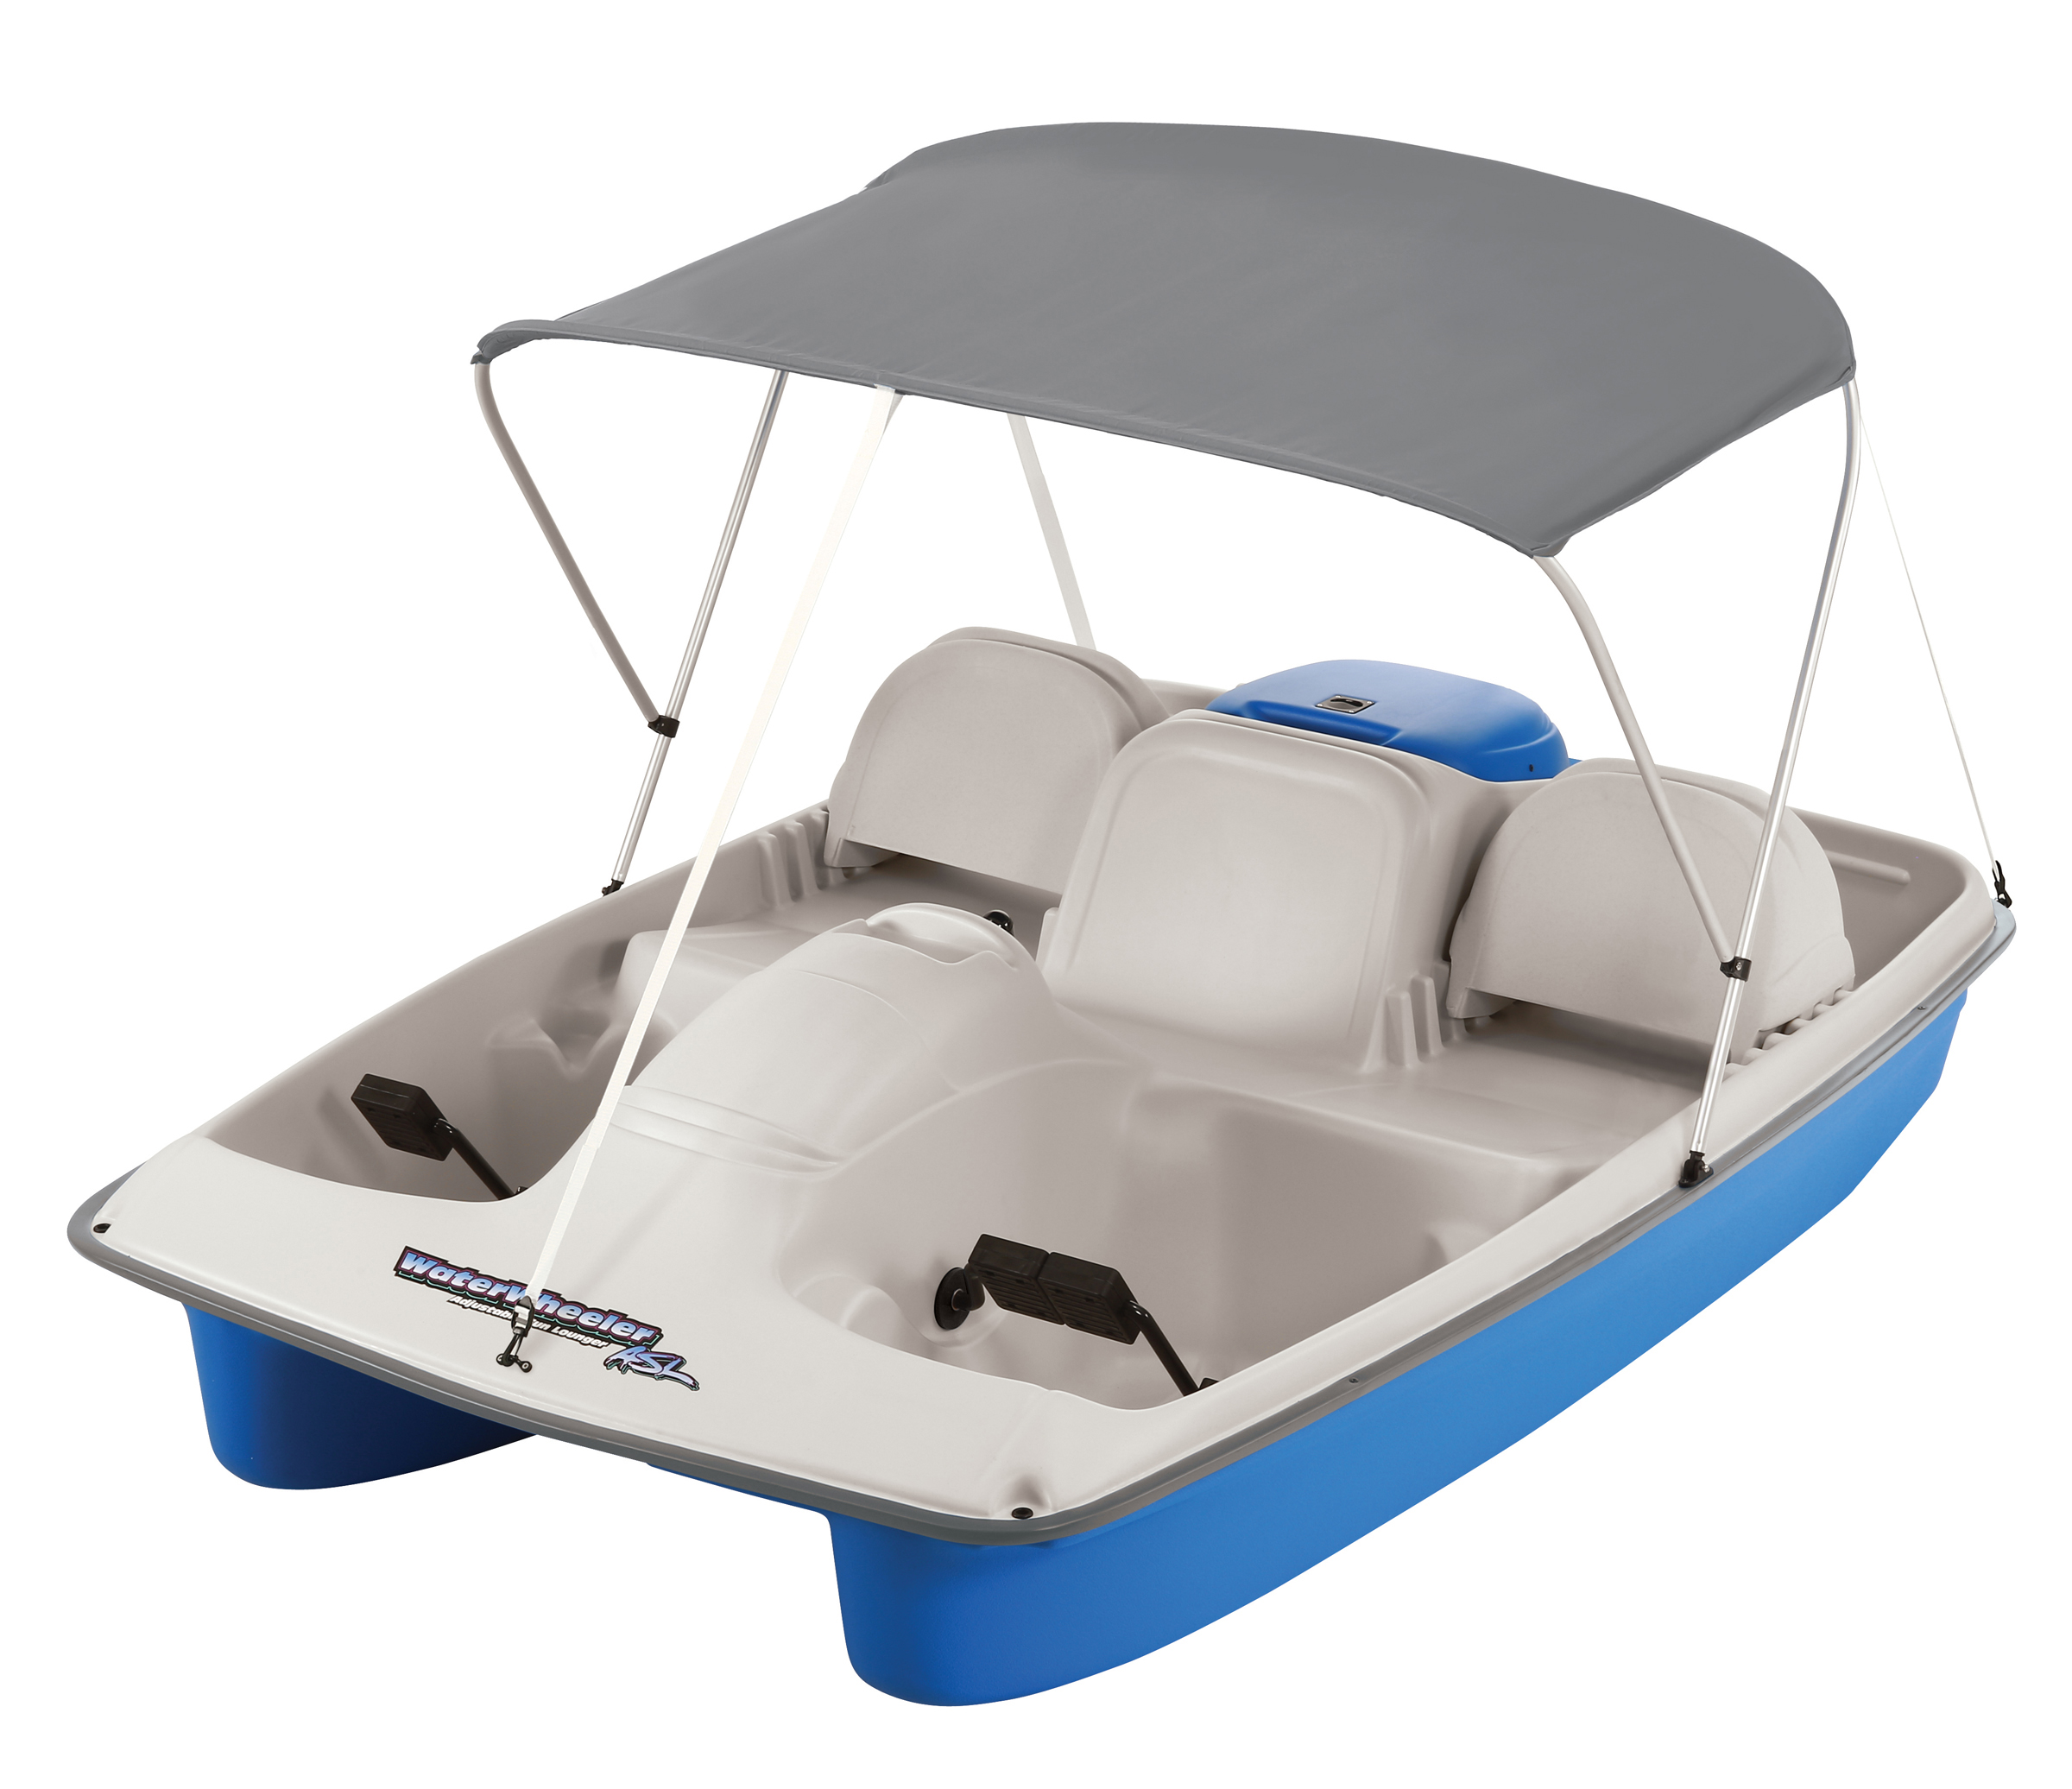 Water Wheeler ASL Electric Pedal Boat with Canopy, Blue - image 1 of 6